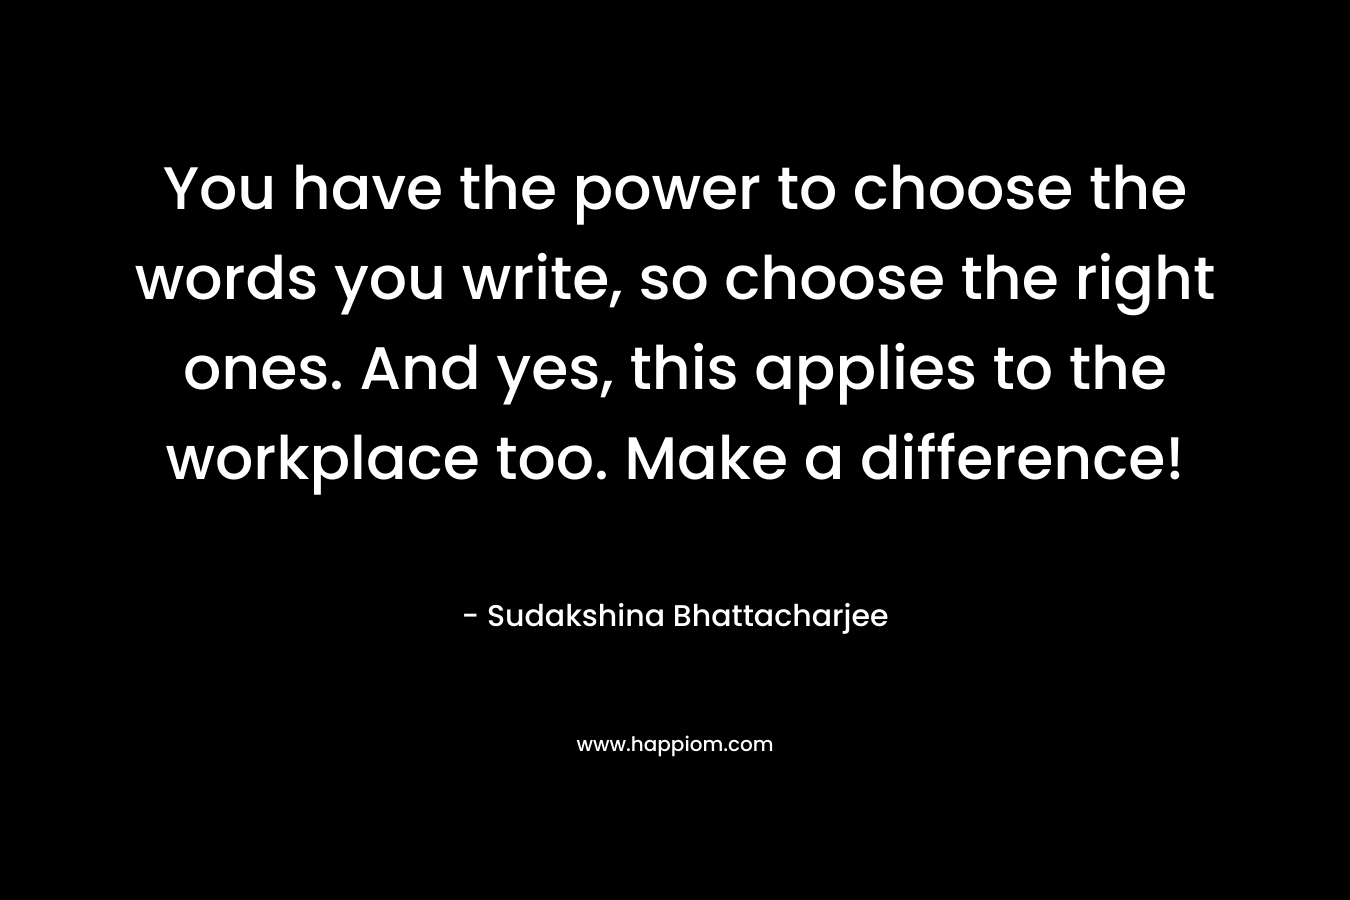 You have the power to choose the words you write, so choose the right ones. And yes, this applies to the workplace too. Make a difference! – Sudakshina Bhattacharjee